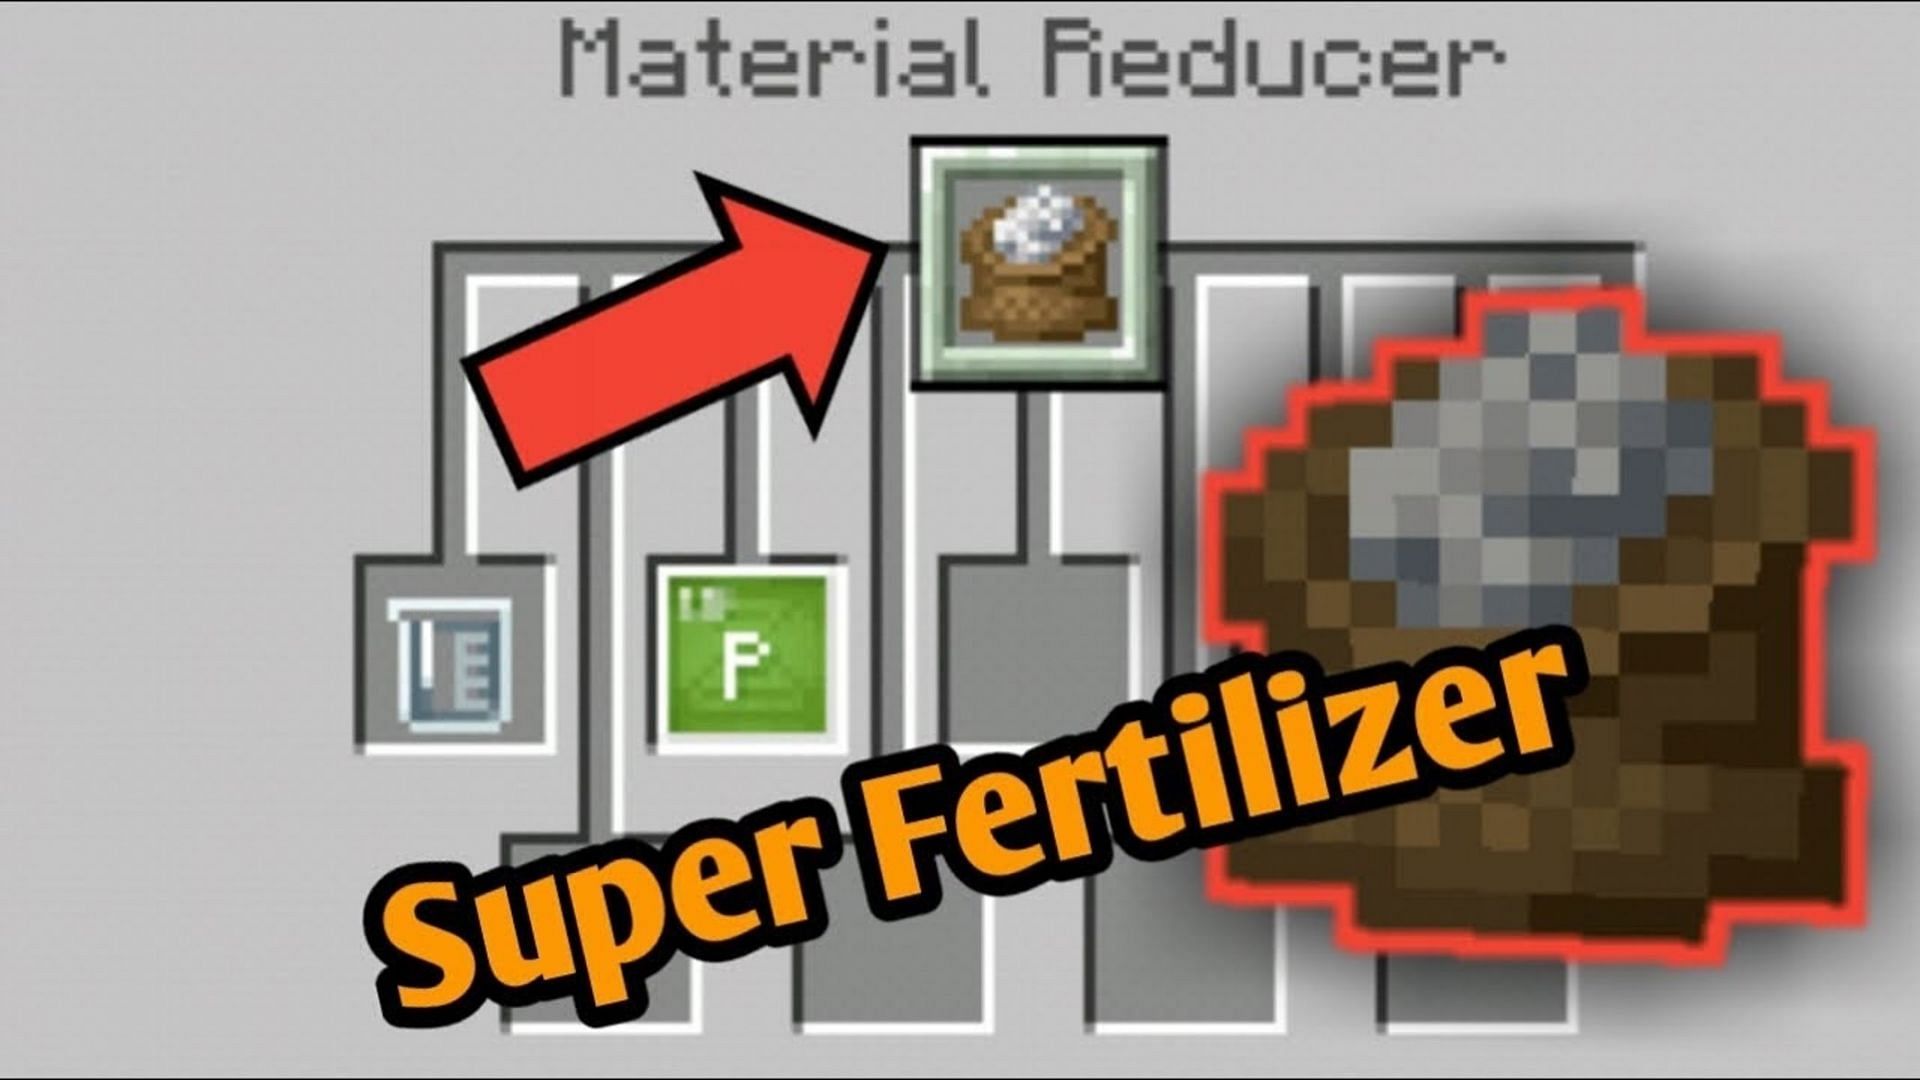 Super fertilizer is an item exclusive to Minecraft Education Edition and Bedrock when Education Edition features are enabled (Image via YouTube/Hiro)